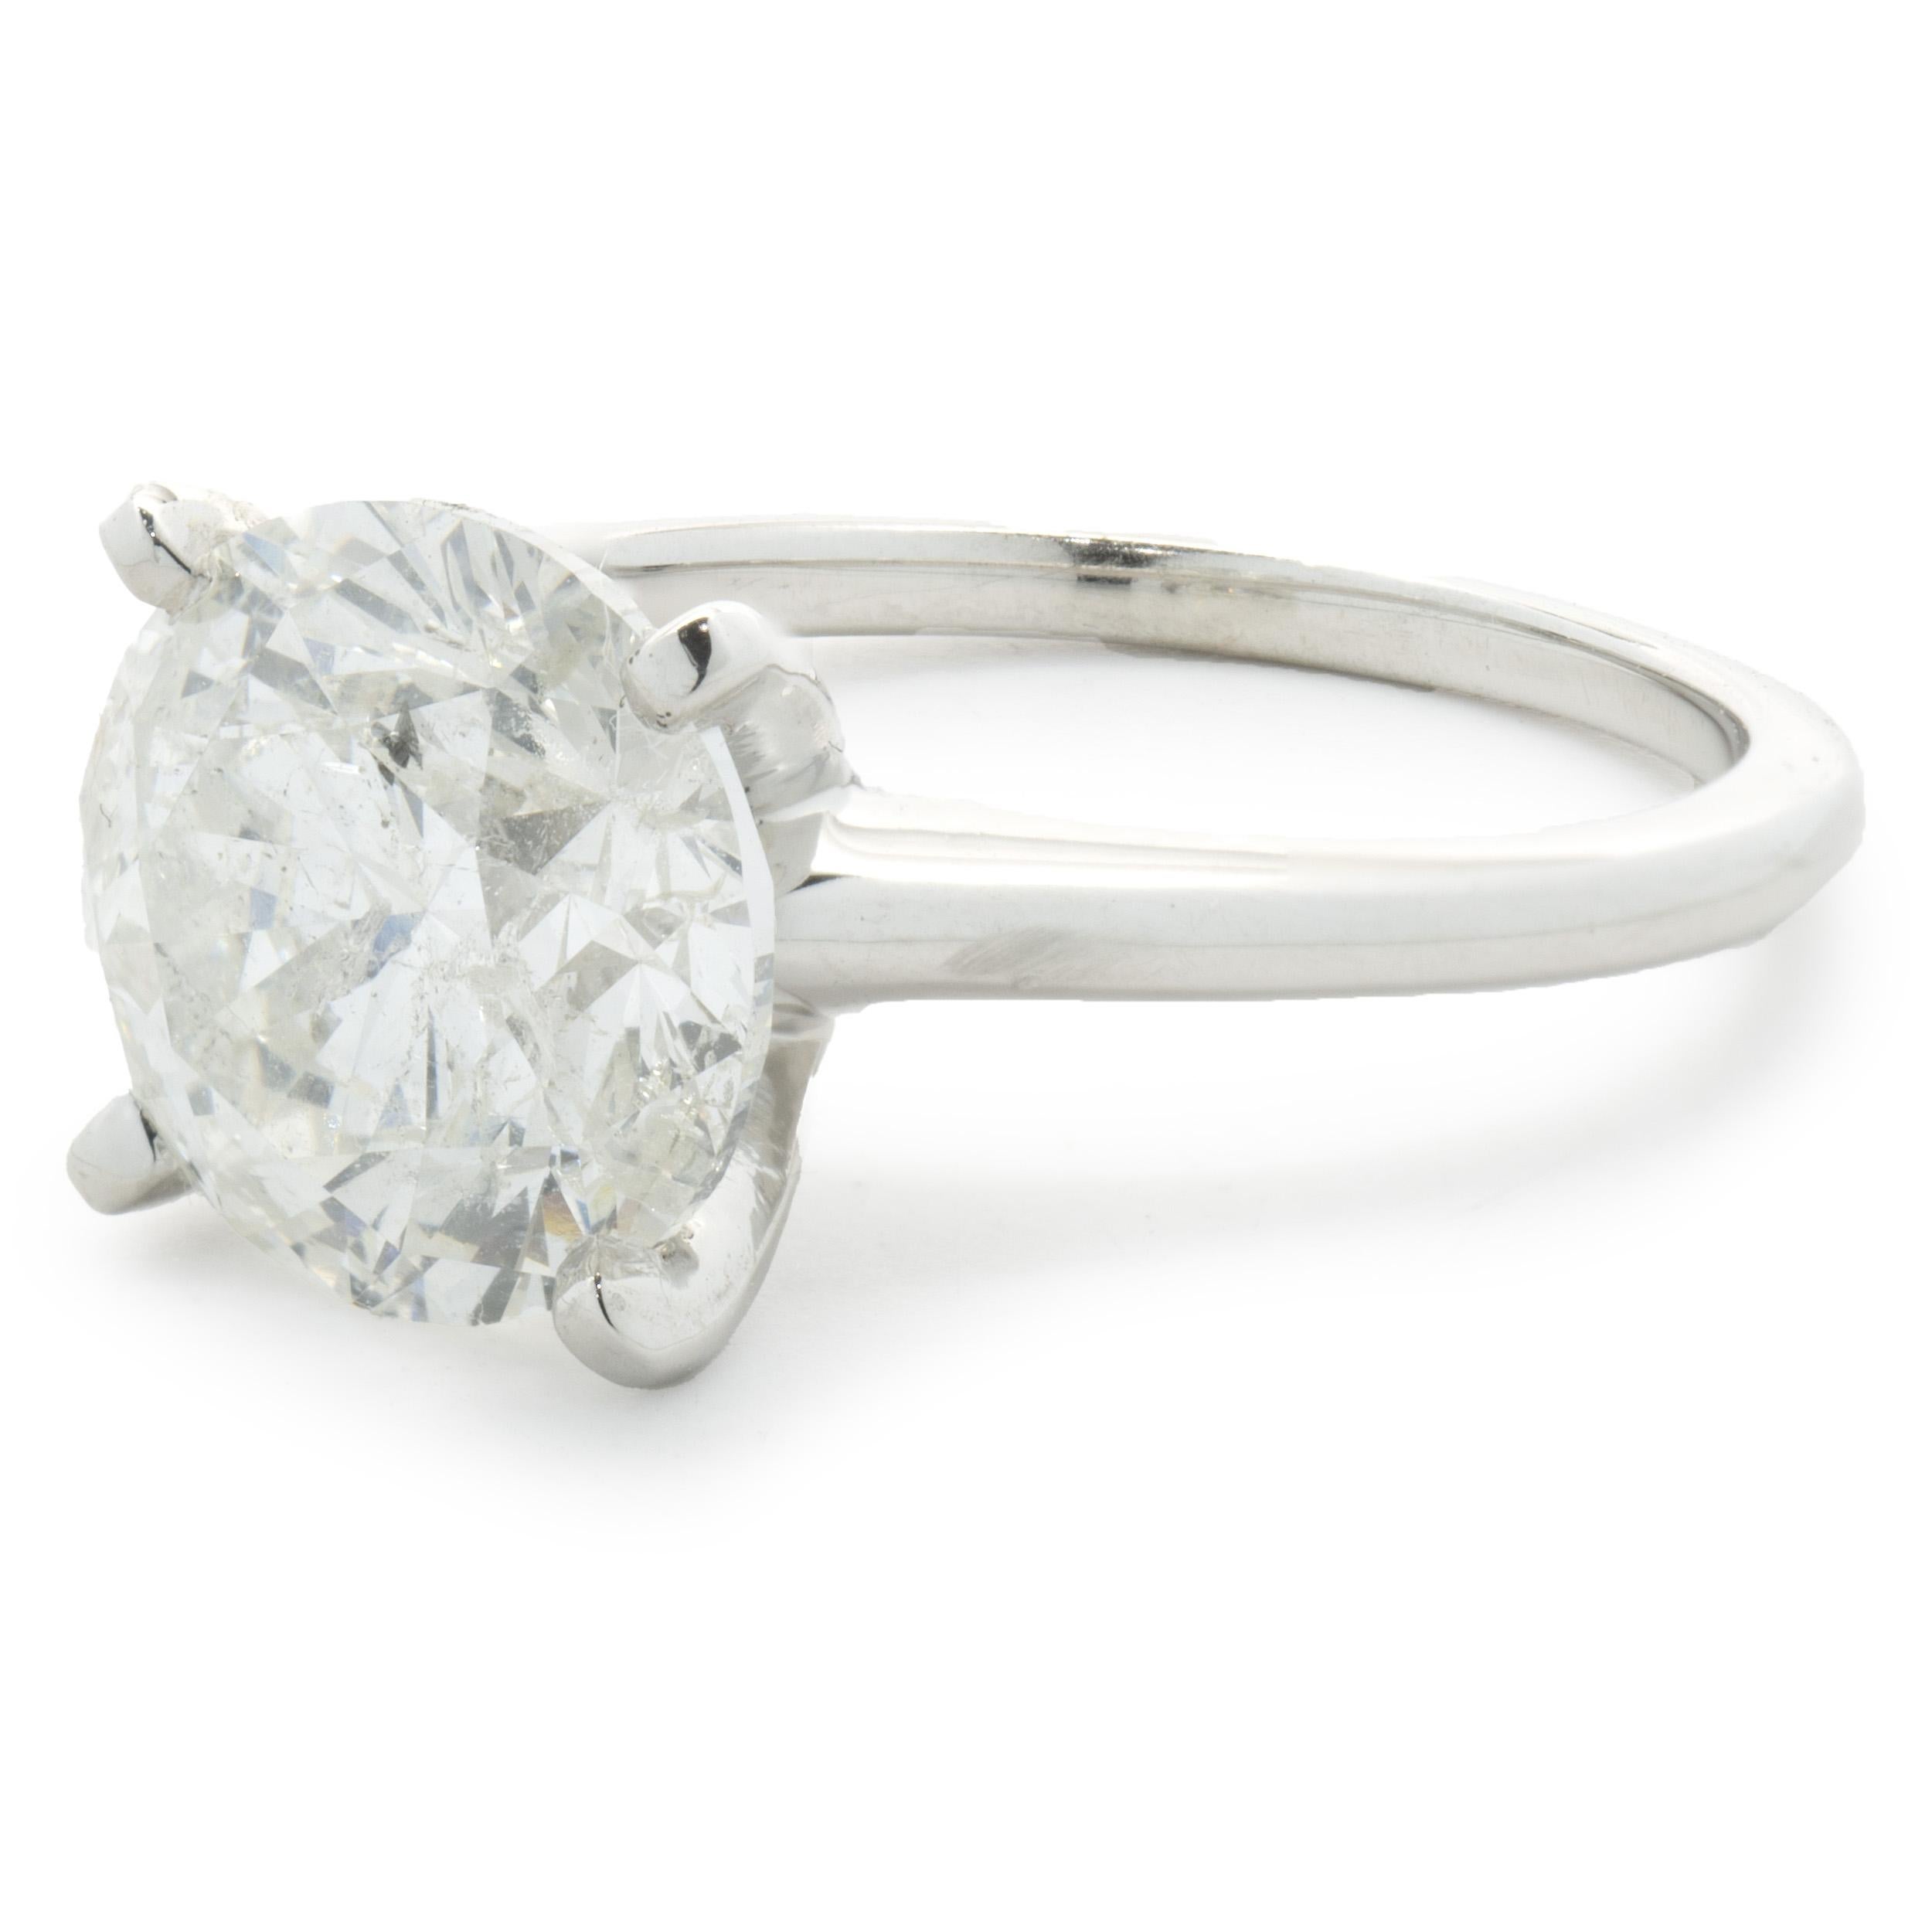 Designer: Custom
Material: 14K white gold
Diamond: 1 round brilliant cut = 4.50ct
Color: H
Clarity: I1
Dimensions: ring top measures 10.25mm wide
Ring Size: 7 (complimentary sizing available)
Weight: 4.49 grams